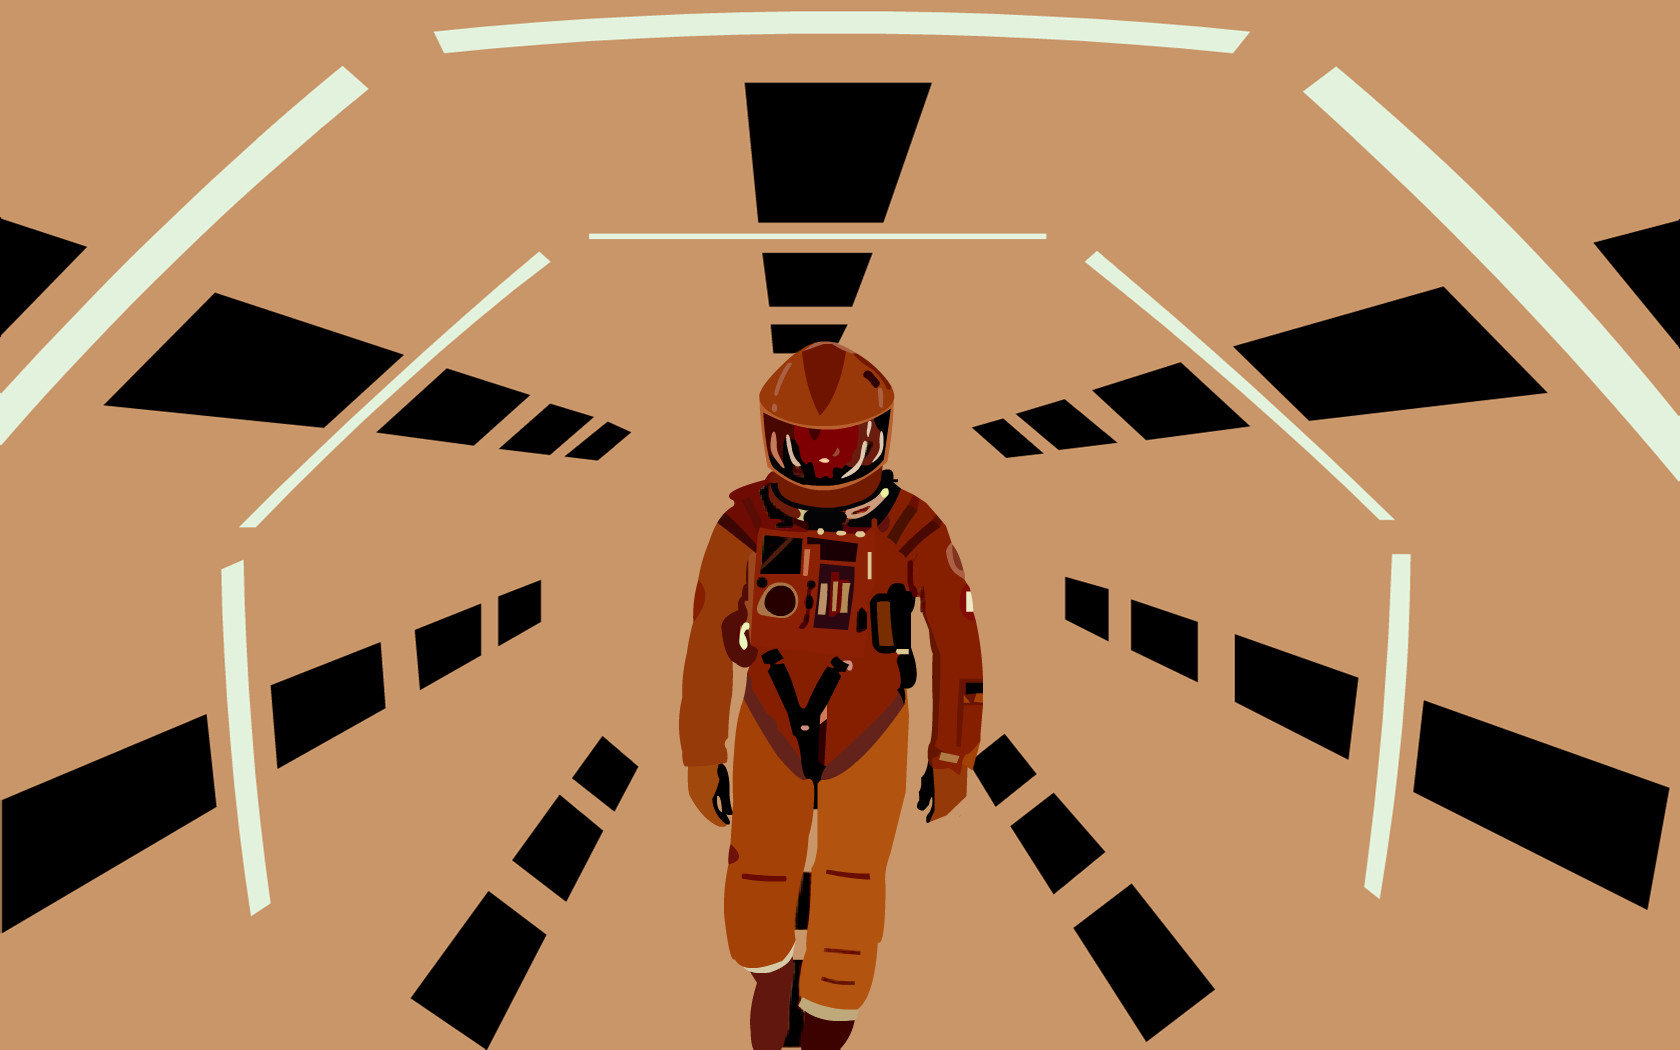 Best 2001: A Space Odyssey wallpaper ID:17802 for High Resolution hd 1680x1050 computer